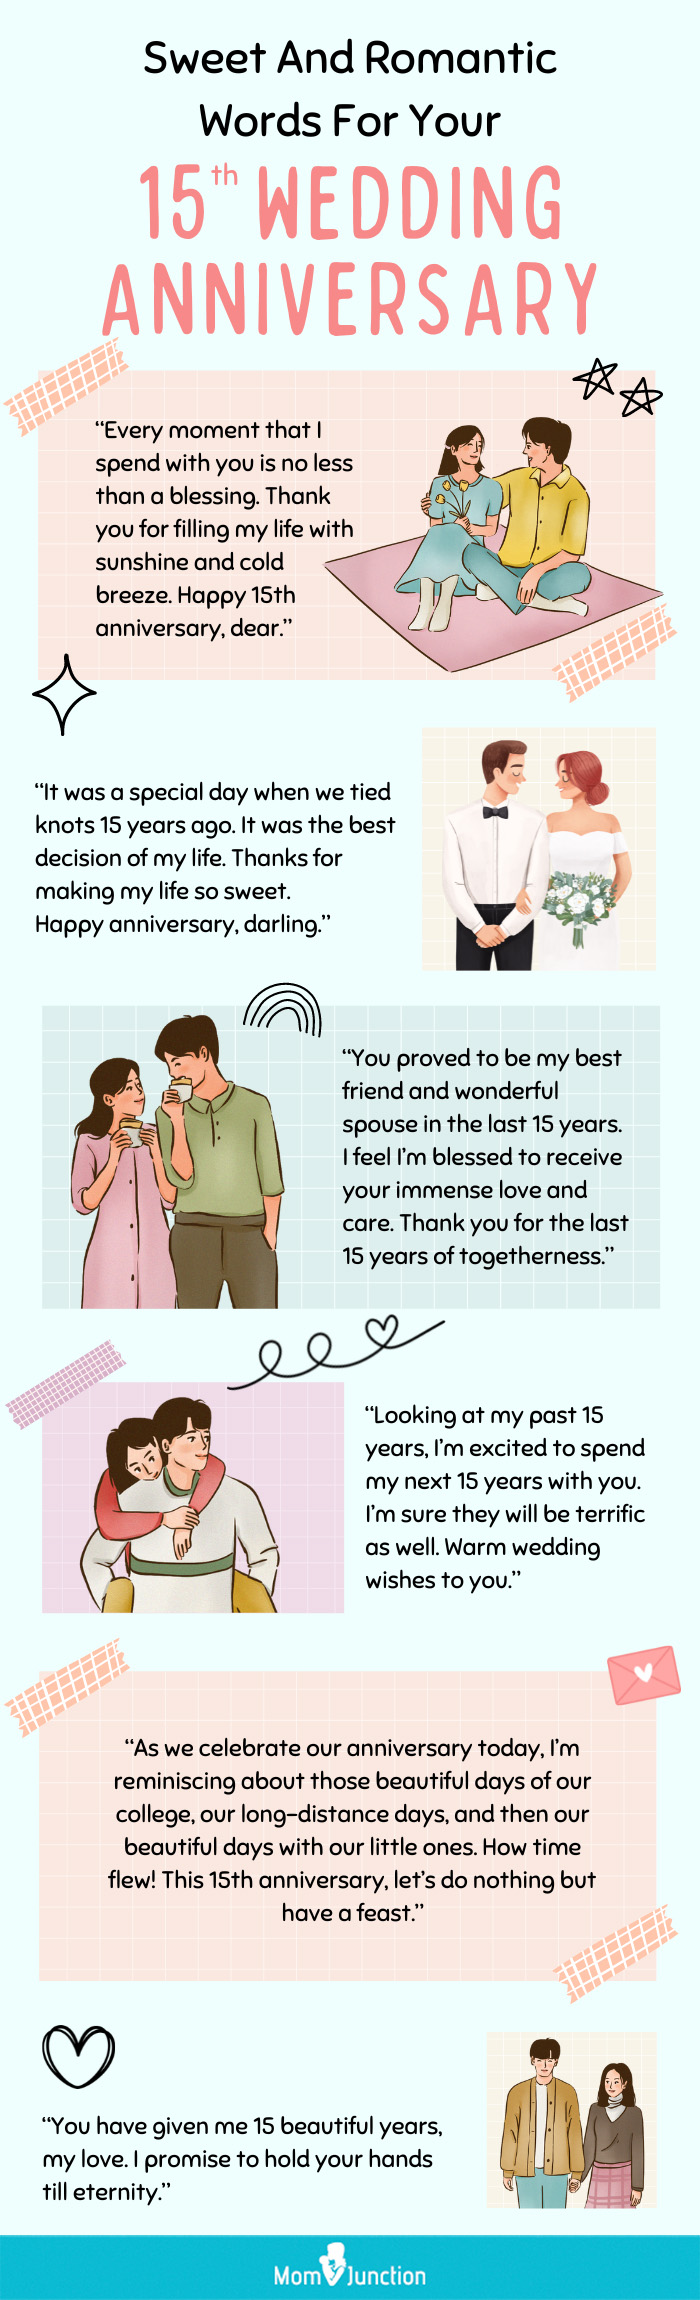 Love Stories: Guided Anniversary Relationship Journal - a Unique